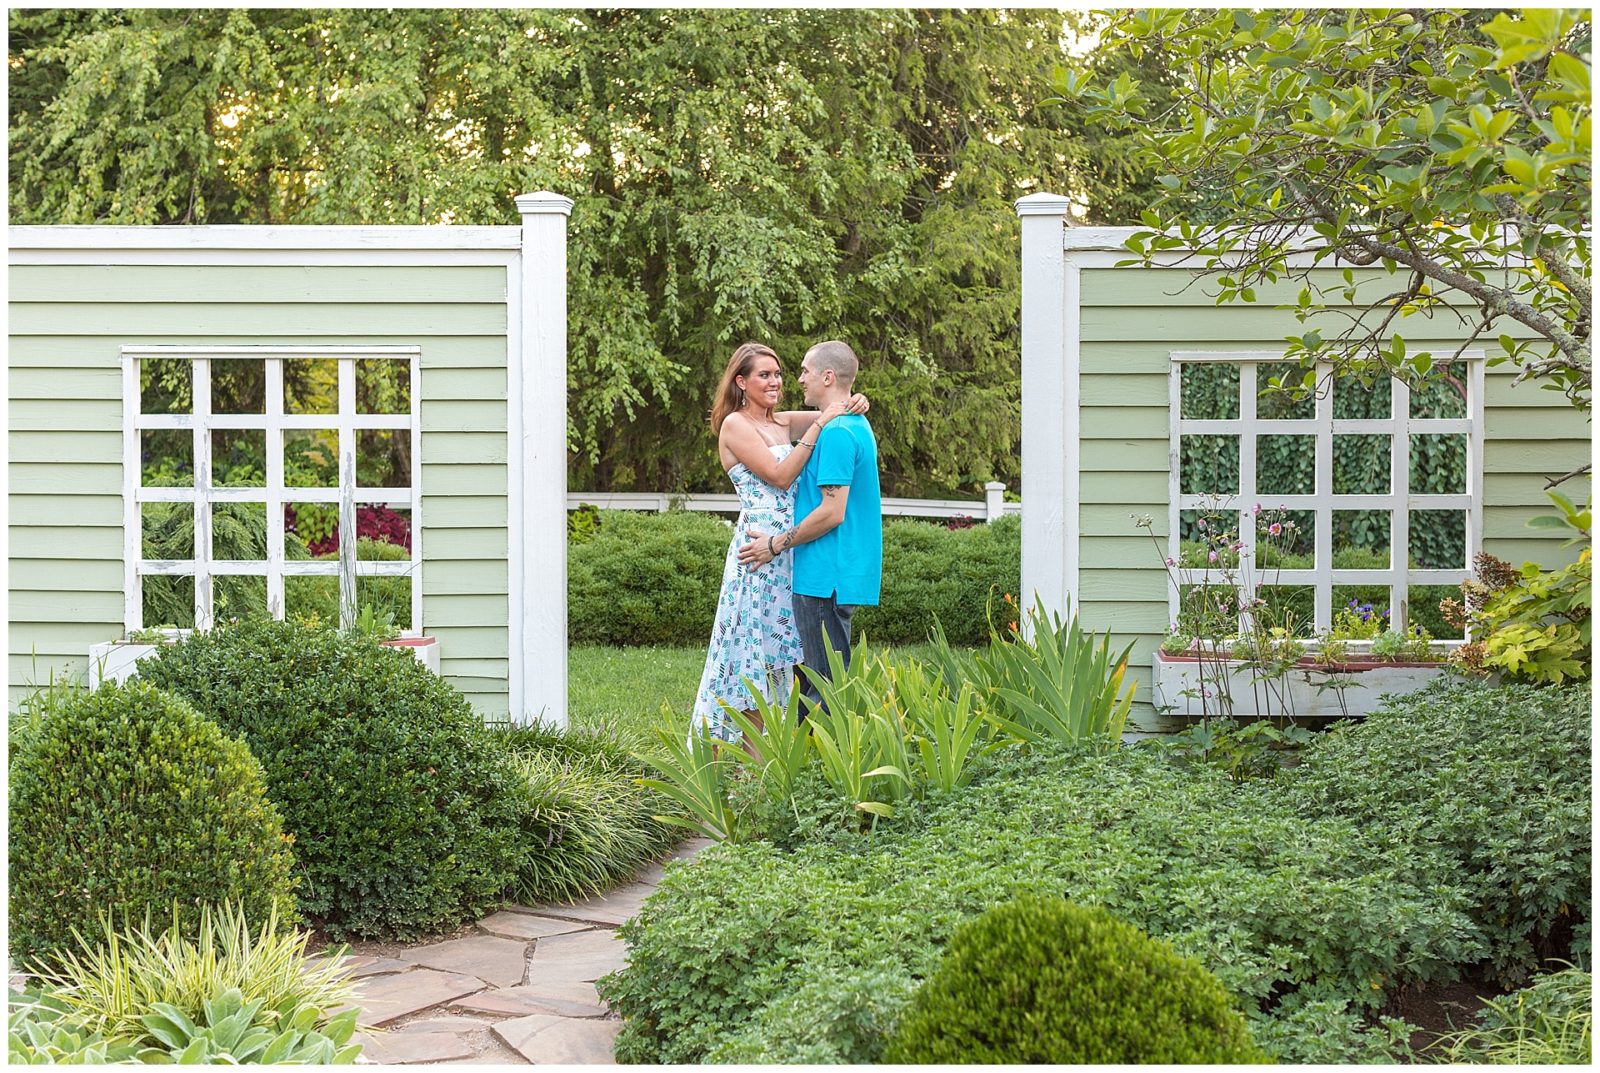 Summer Engagement Session at the University of Kentucky's Arboretum in Lexington, Kentucky. Photo by: Kevin and Anna Photography www.kevinandannaweddings.com